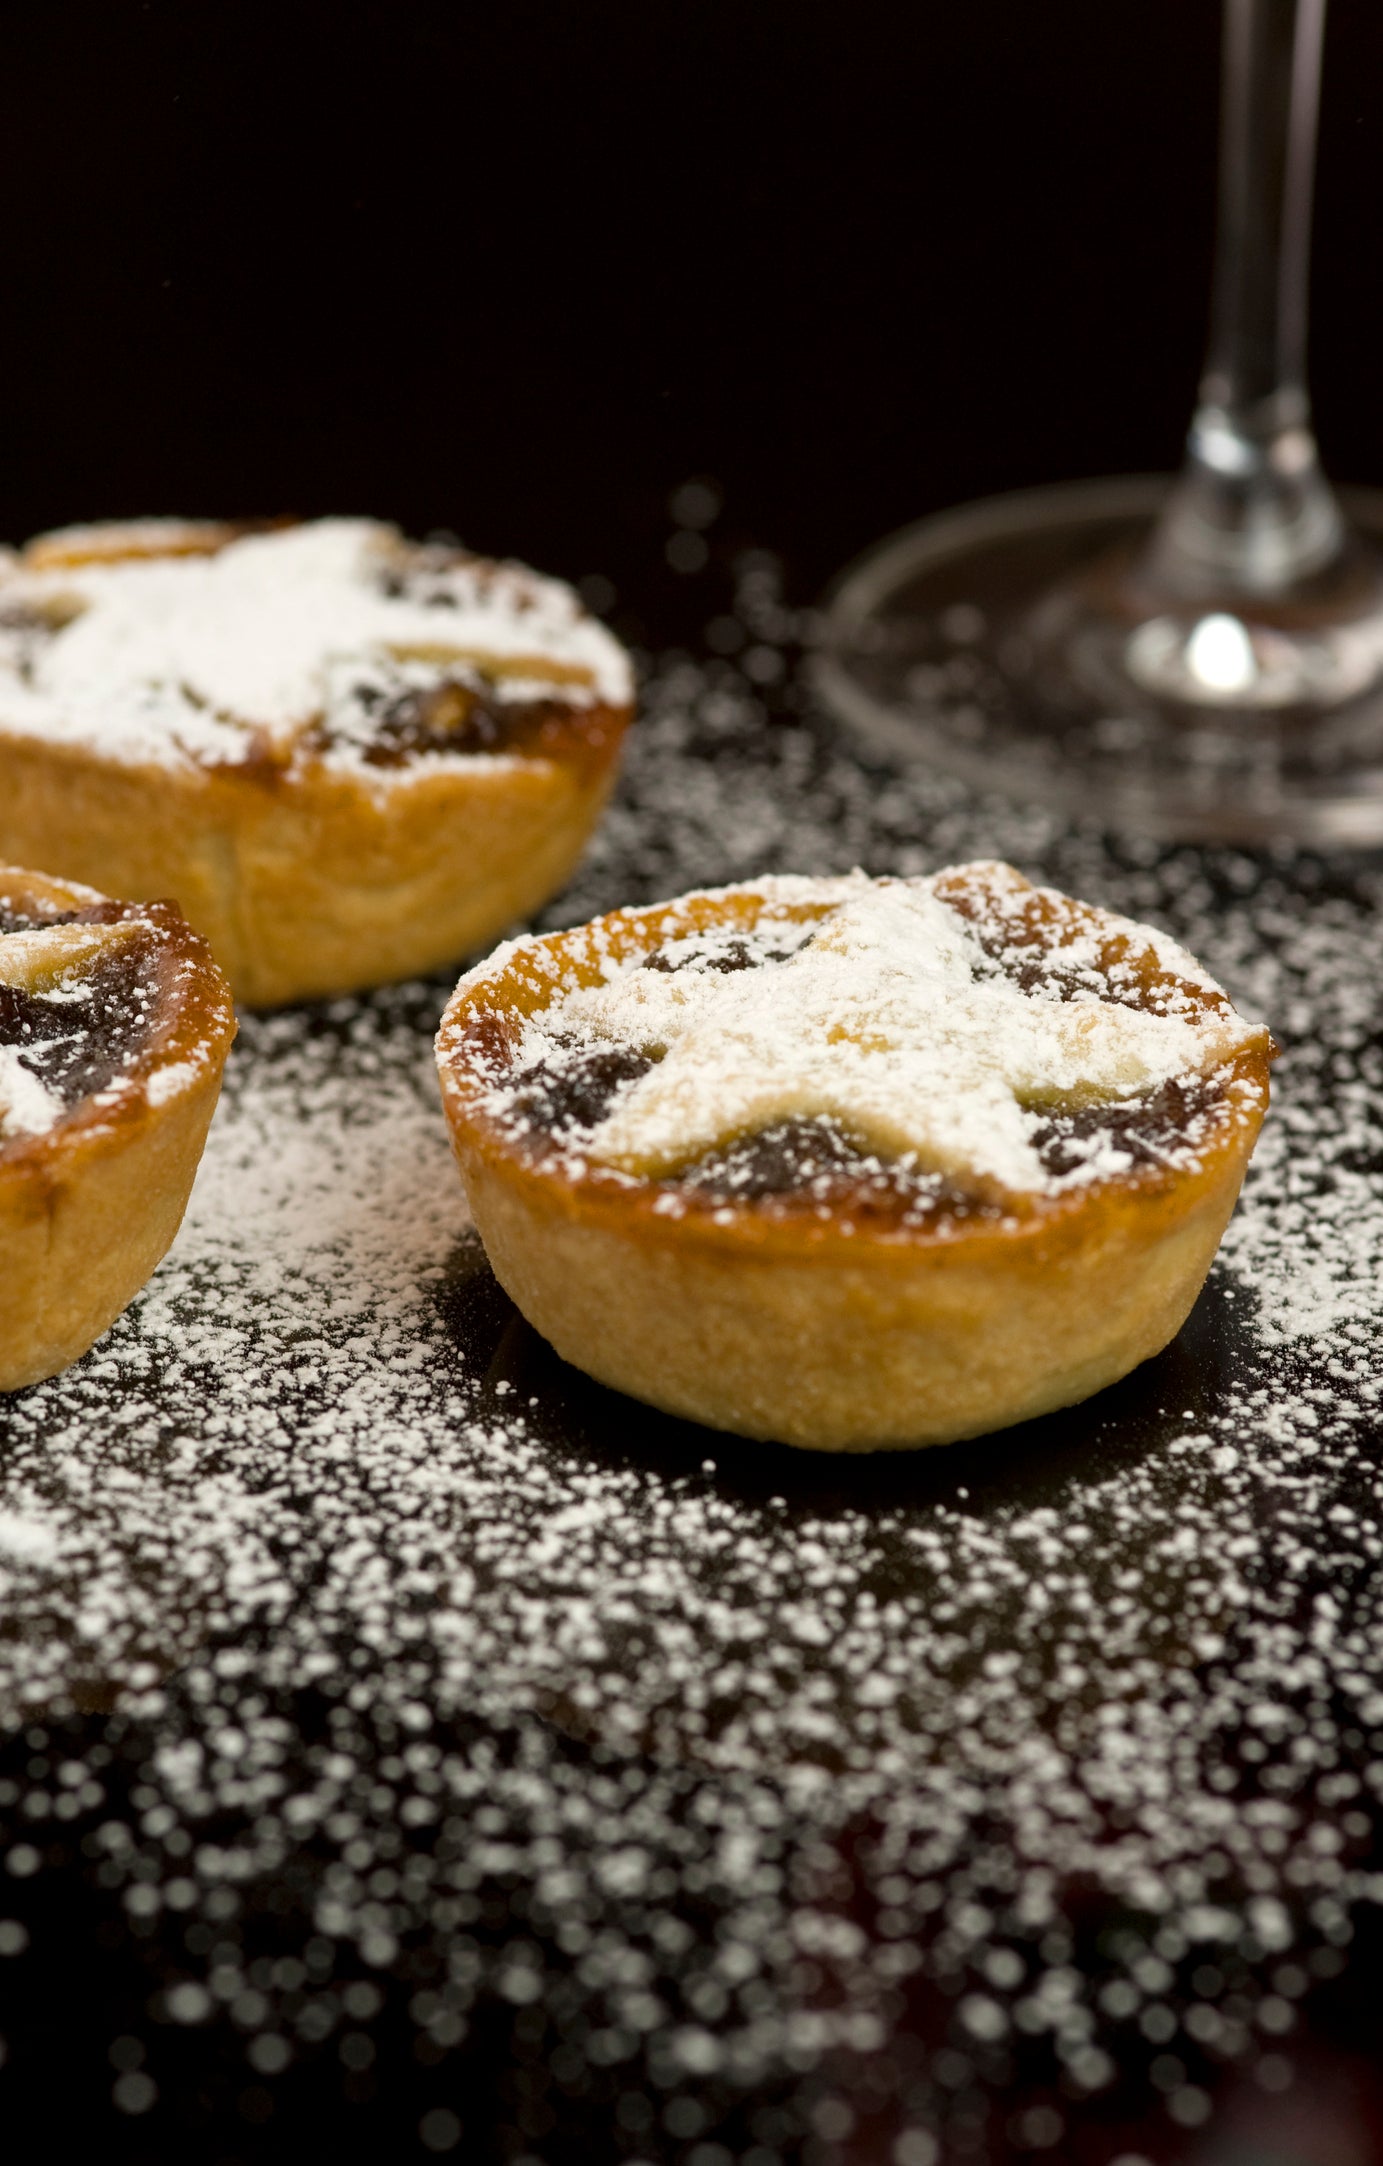 Even mince pies are easily achieved in the air fryer